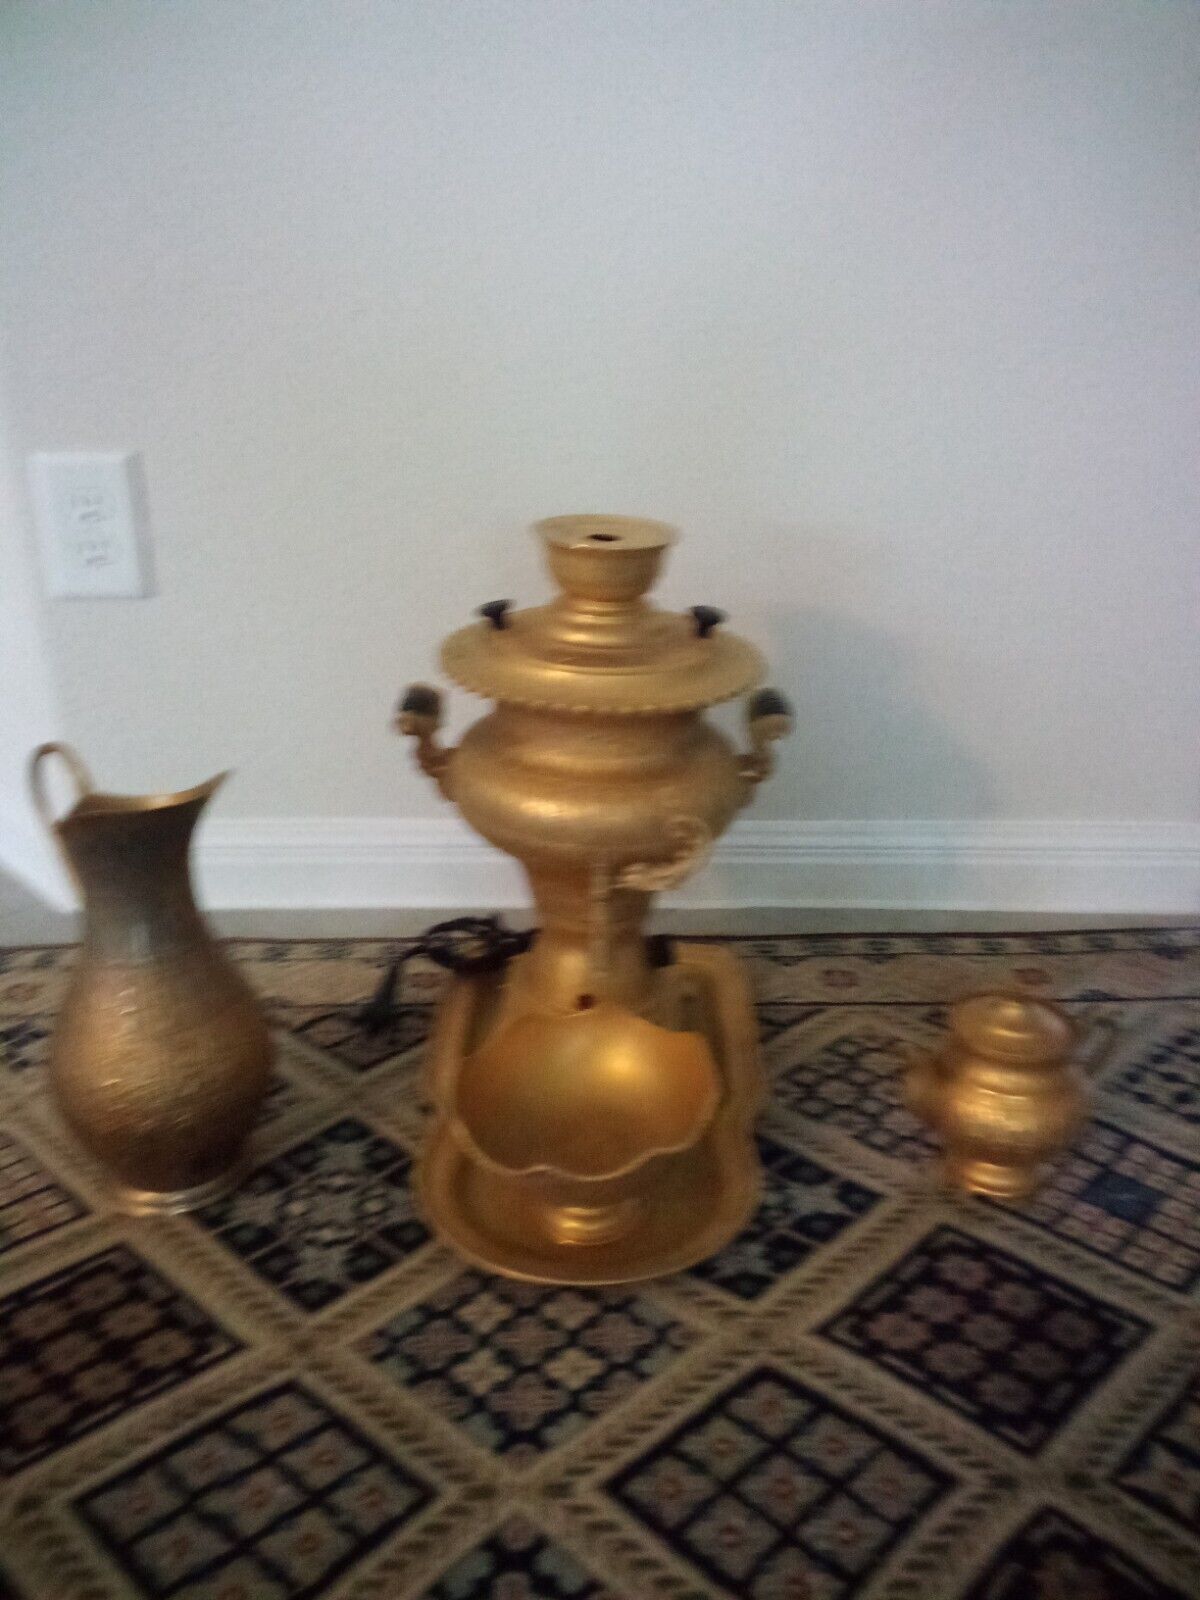 Antique Persian Gold Plated Samovar  and  Tea Set 5 Pieces(Free Shipping)